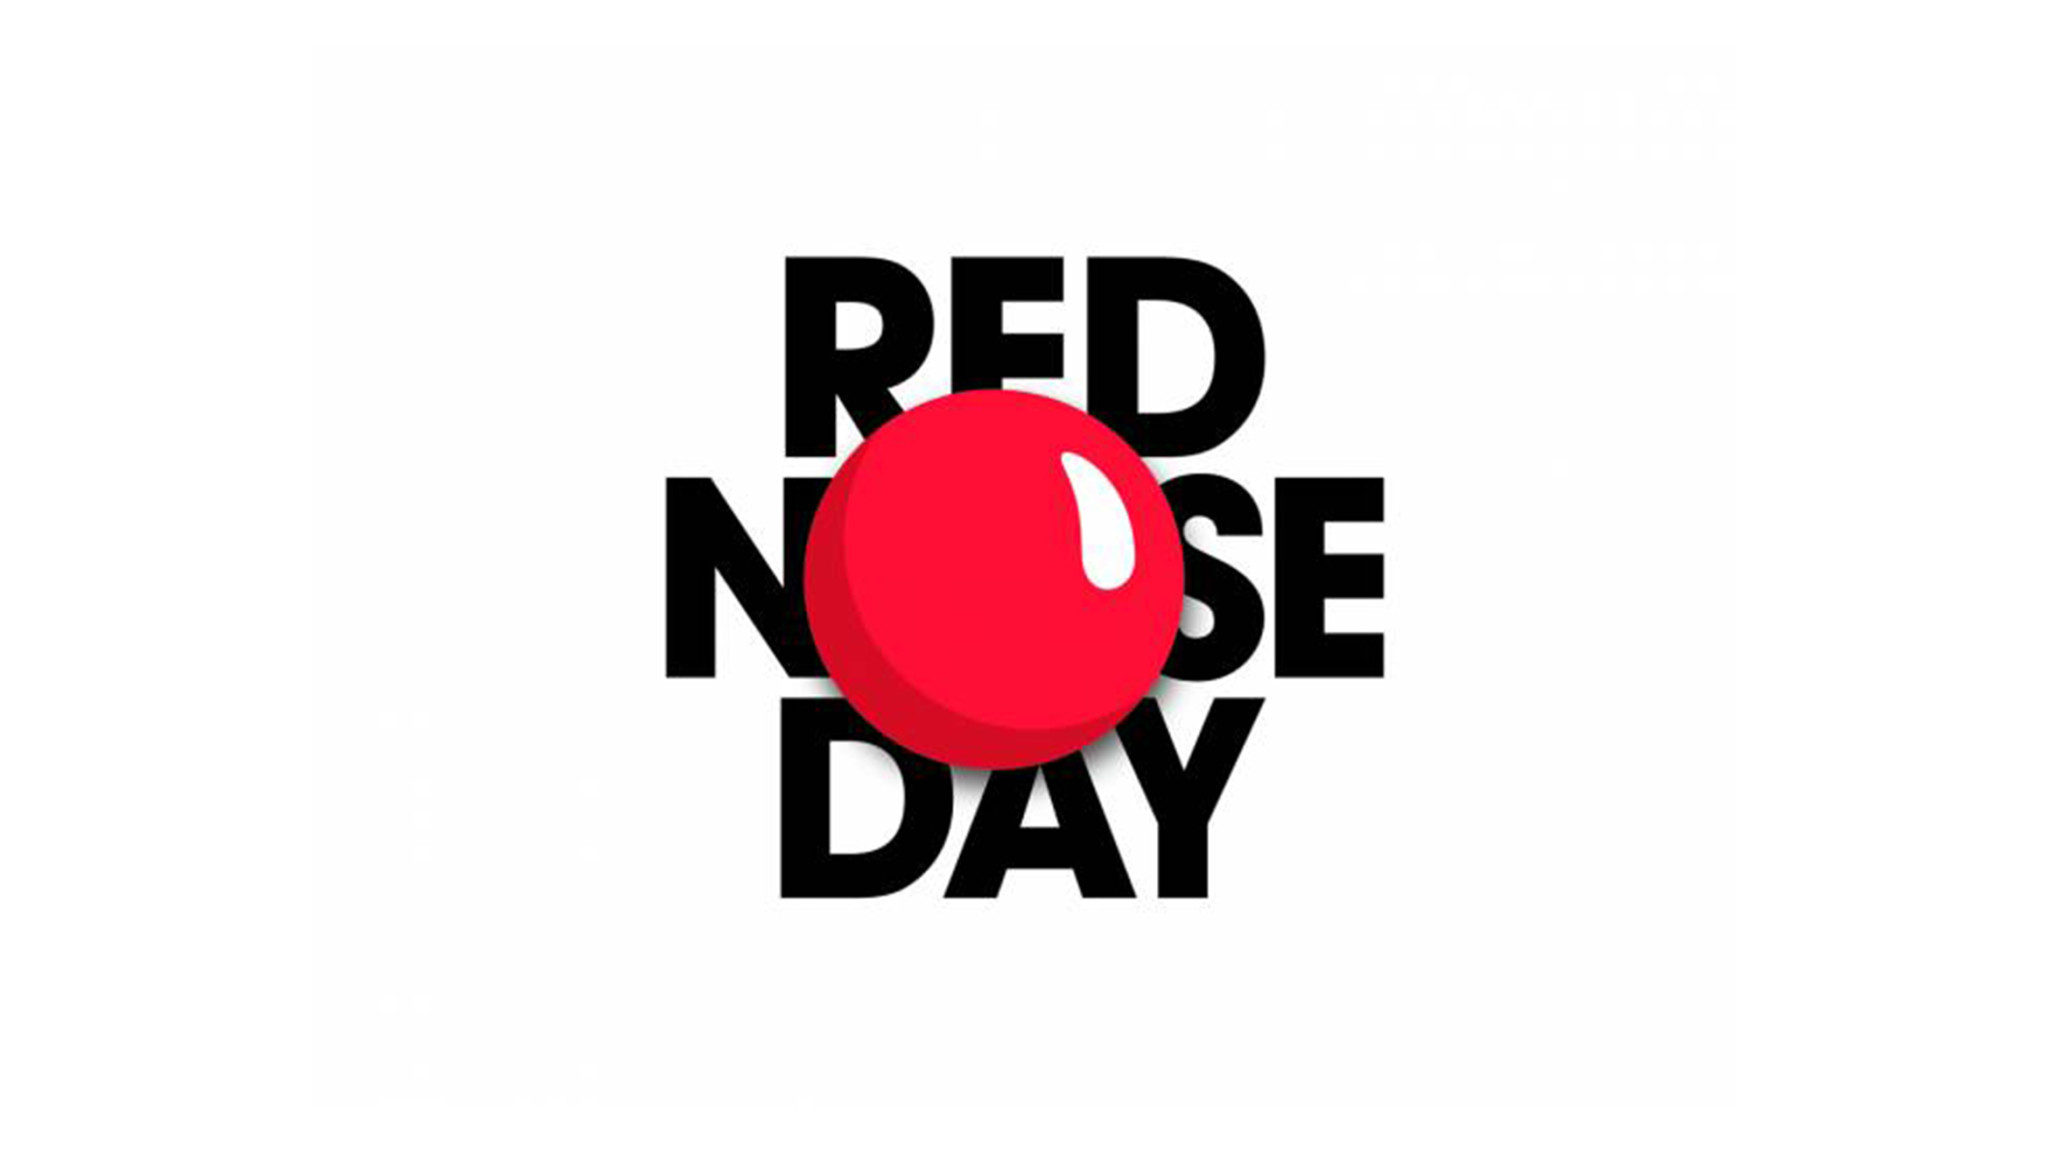 Super Bowl moment for Red Nose Day USA Comic Relief